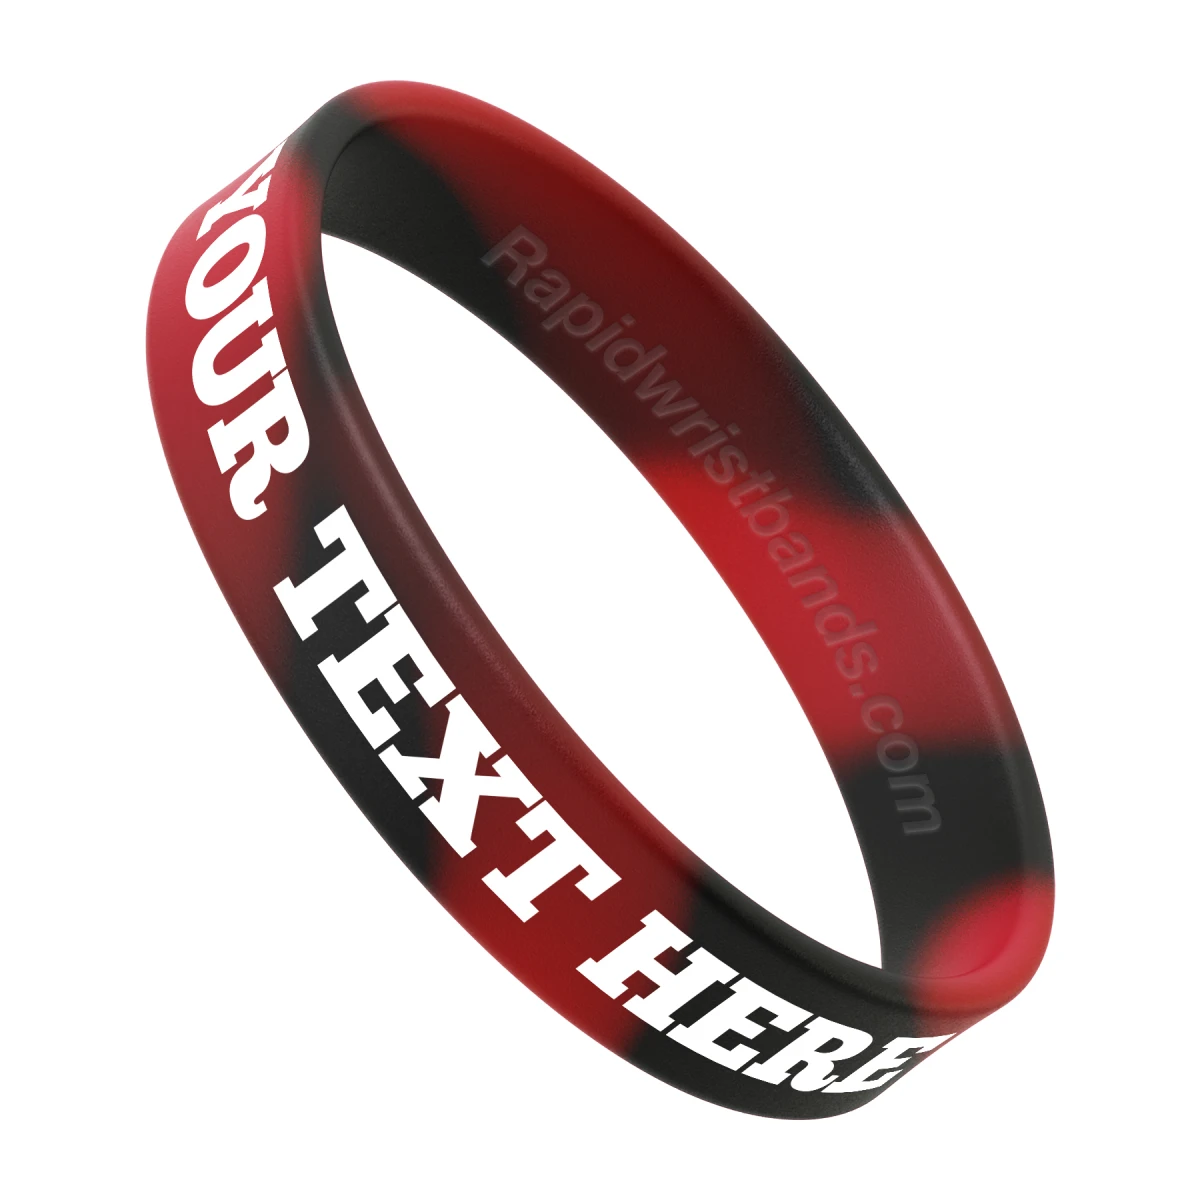 Swirl Red/Black Wristband With Your Text Here Printed In White